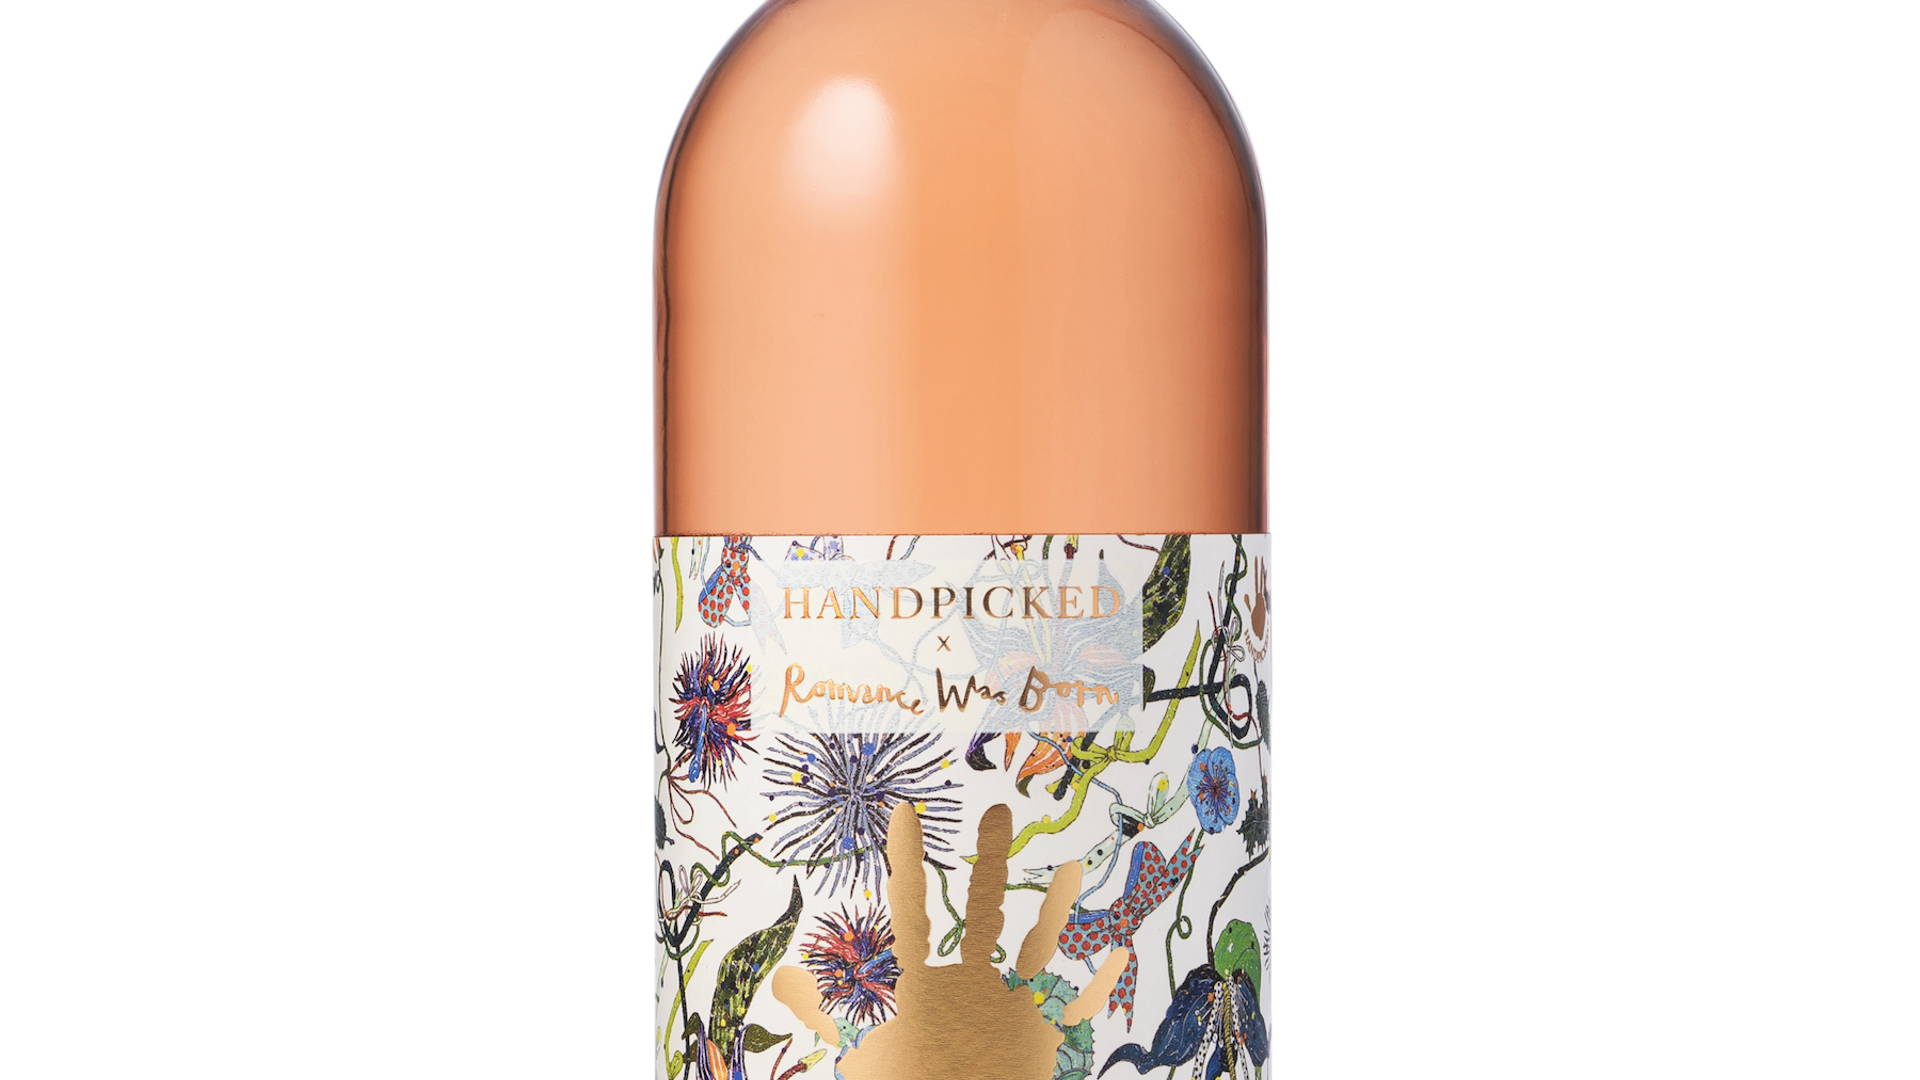 Featured image for This Romantic Rosé Reflects a Love of Wine & Creativity